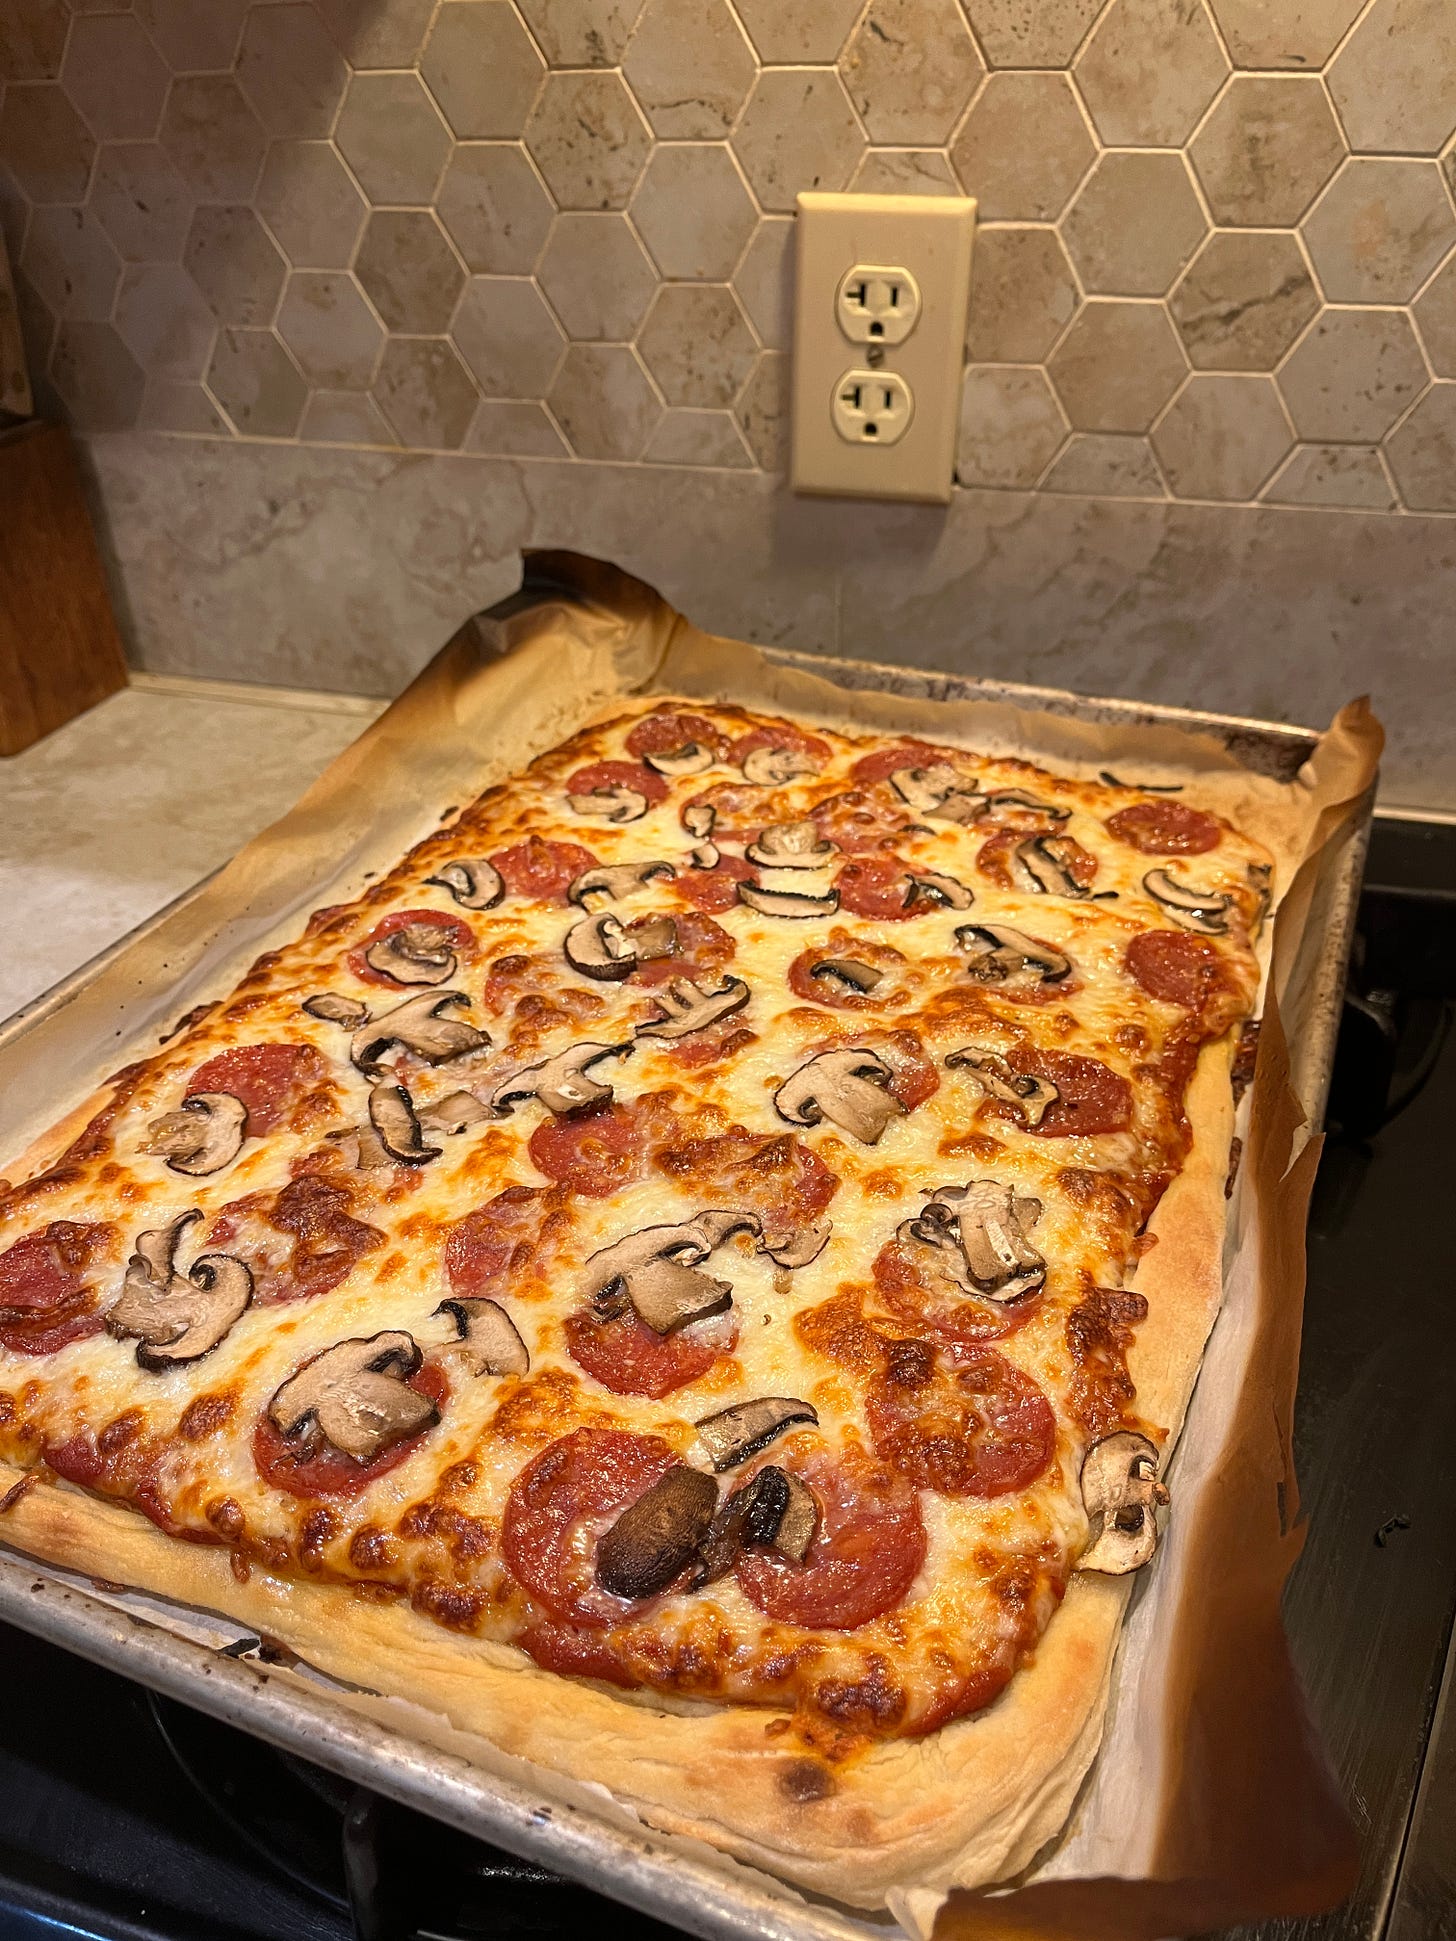 A rectangular pizza with salami and mushrooms sits on a slightly burnt parchment paper on a baking sheet